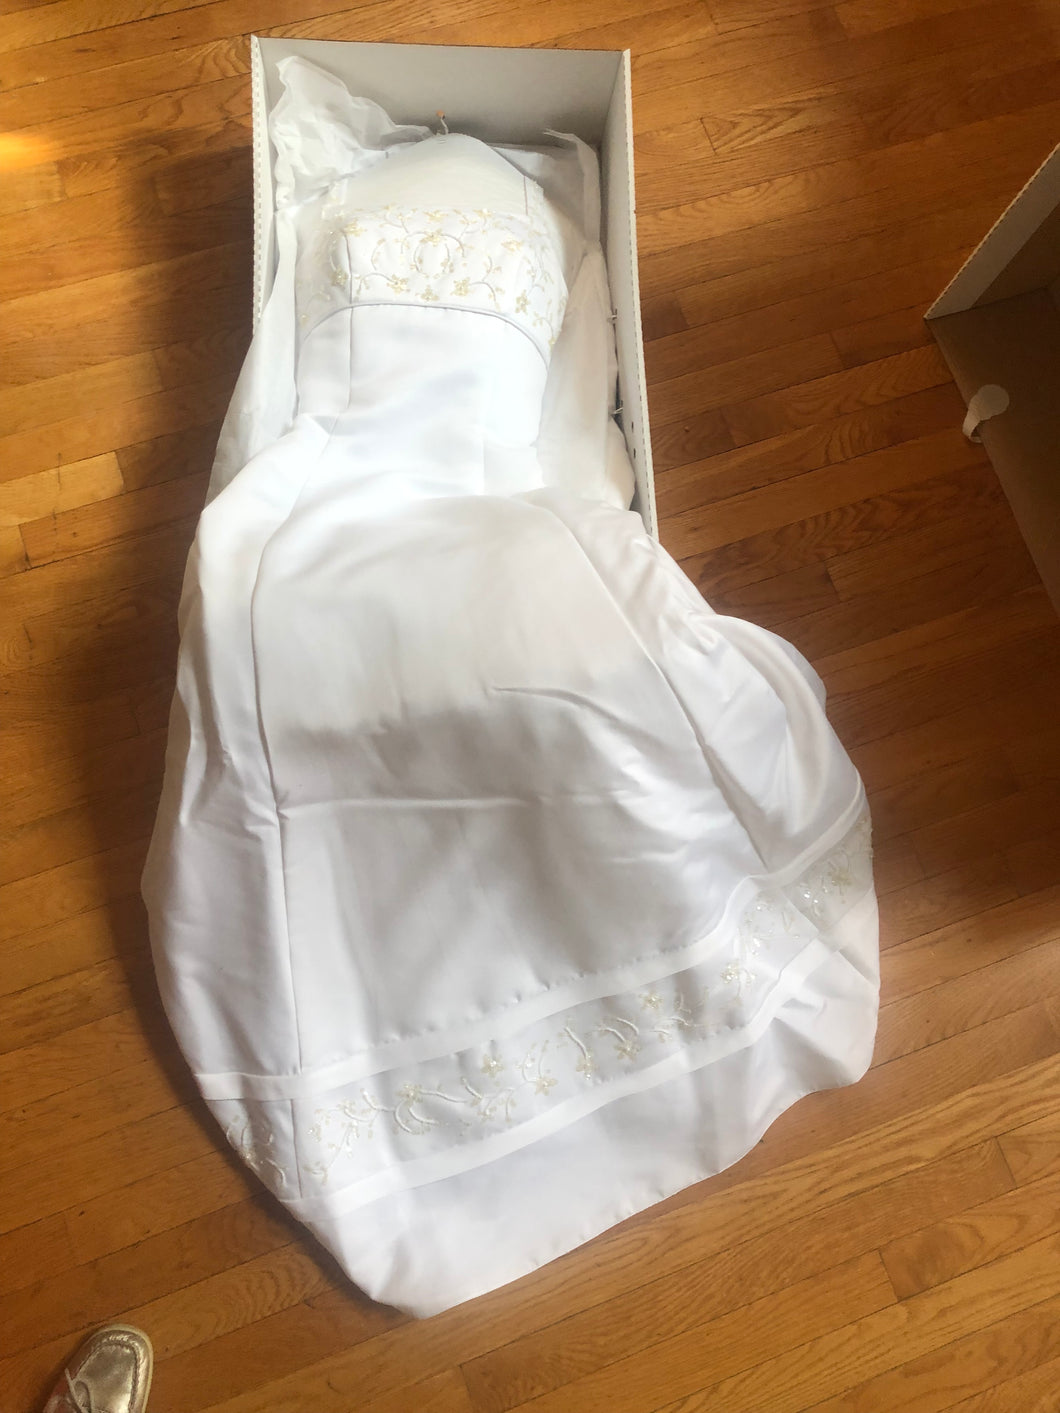 Oleg Cassini 'A Line Tank' size 8 used wedding dress front view in box